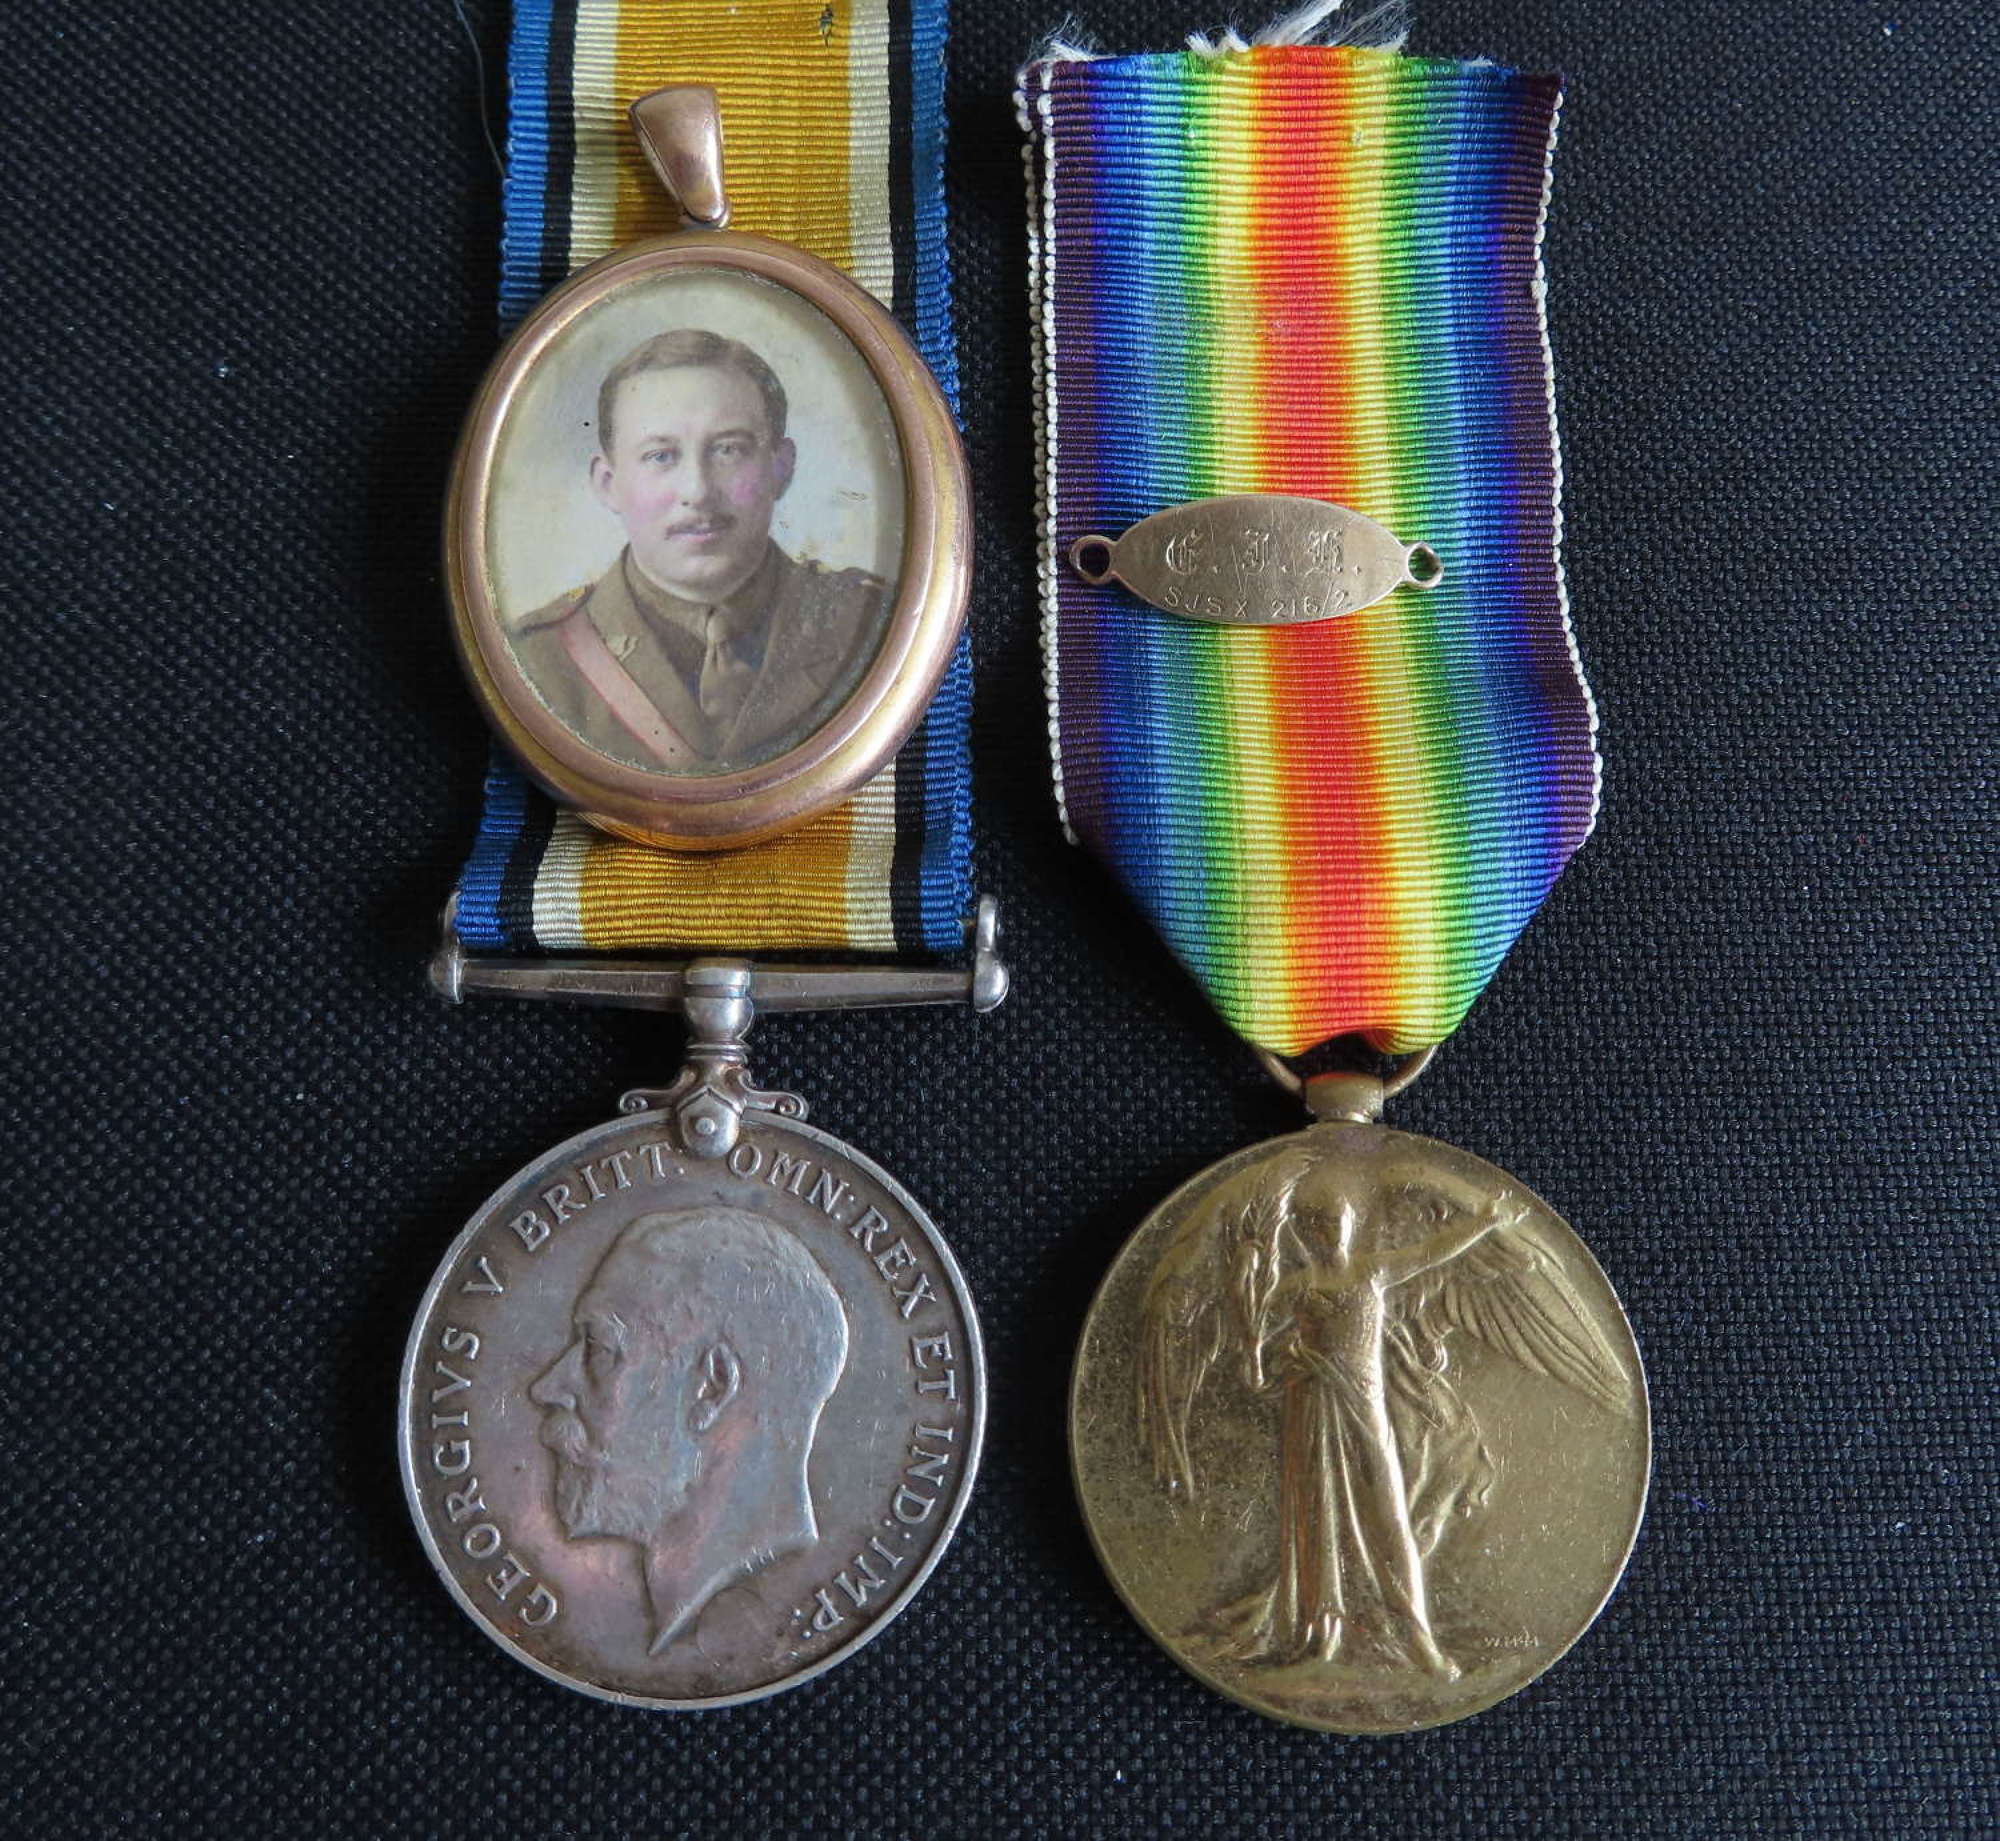 WW1 Officers pair of medals with 9ct gold locket and identity tag